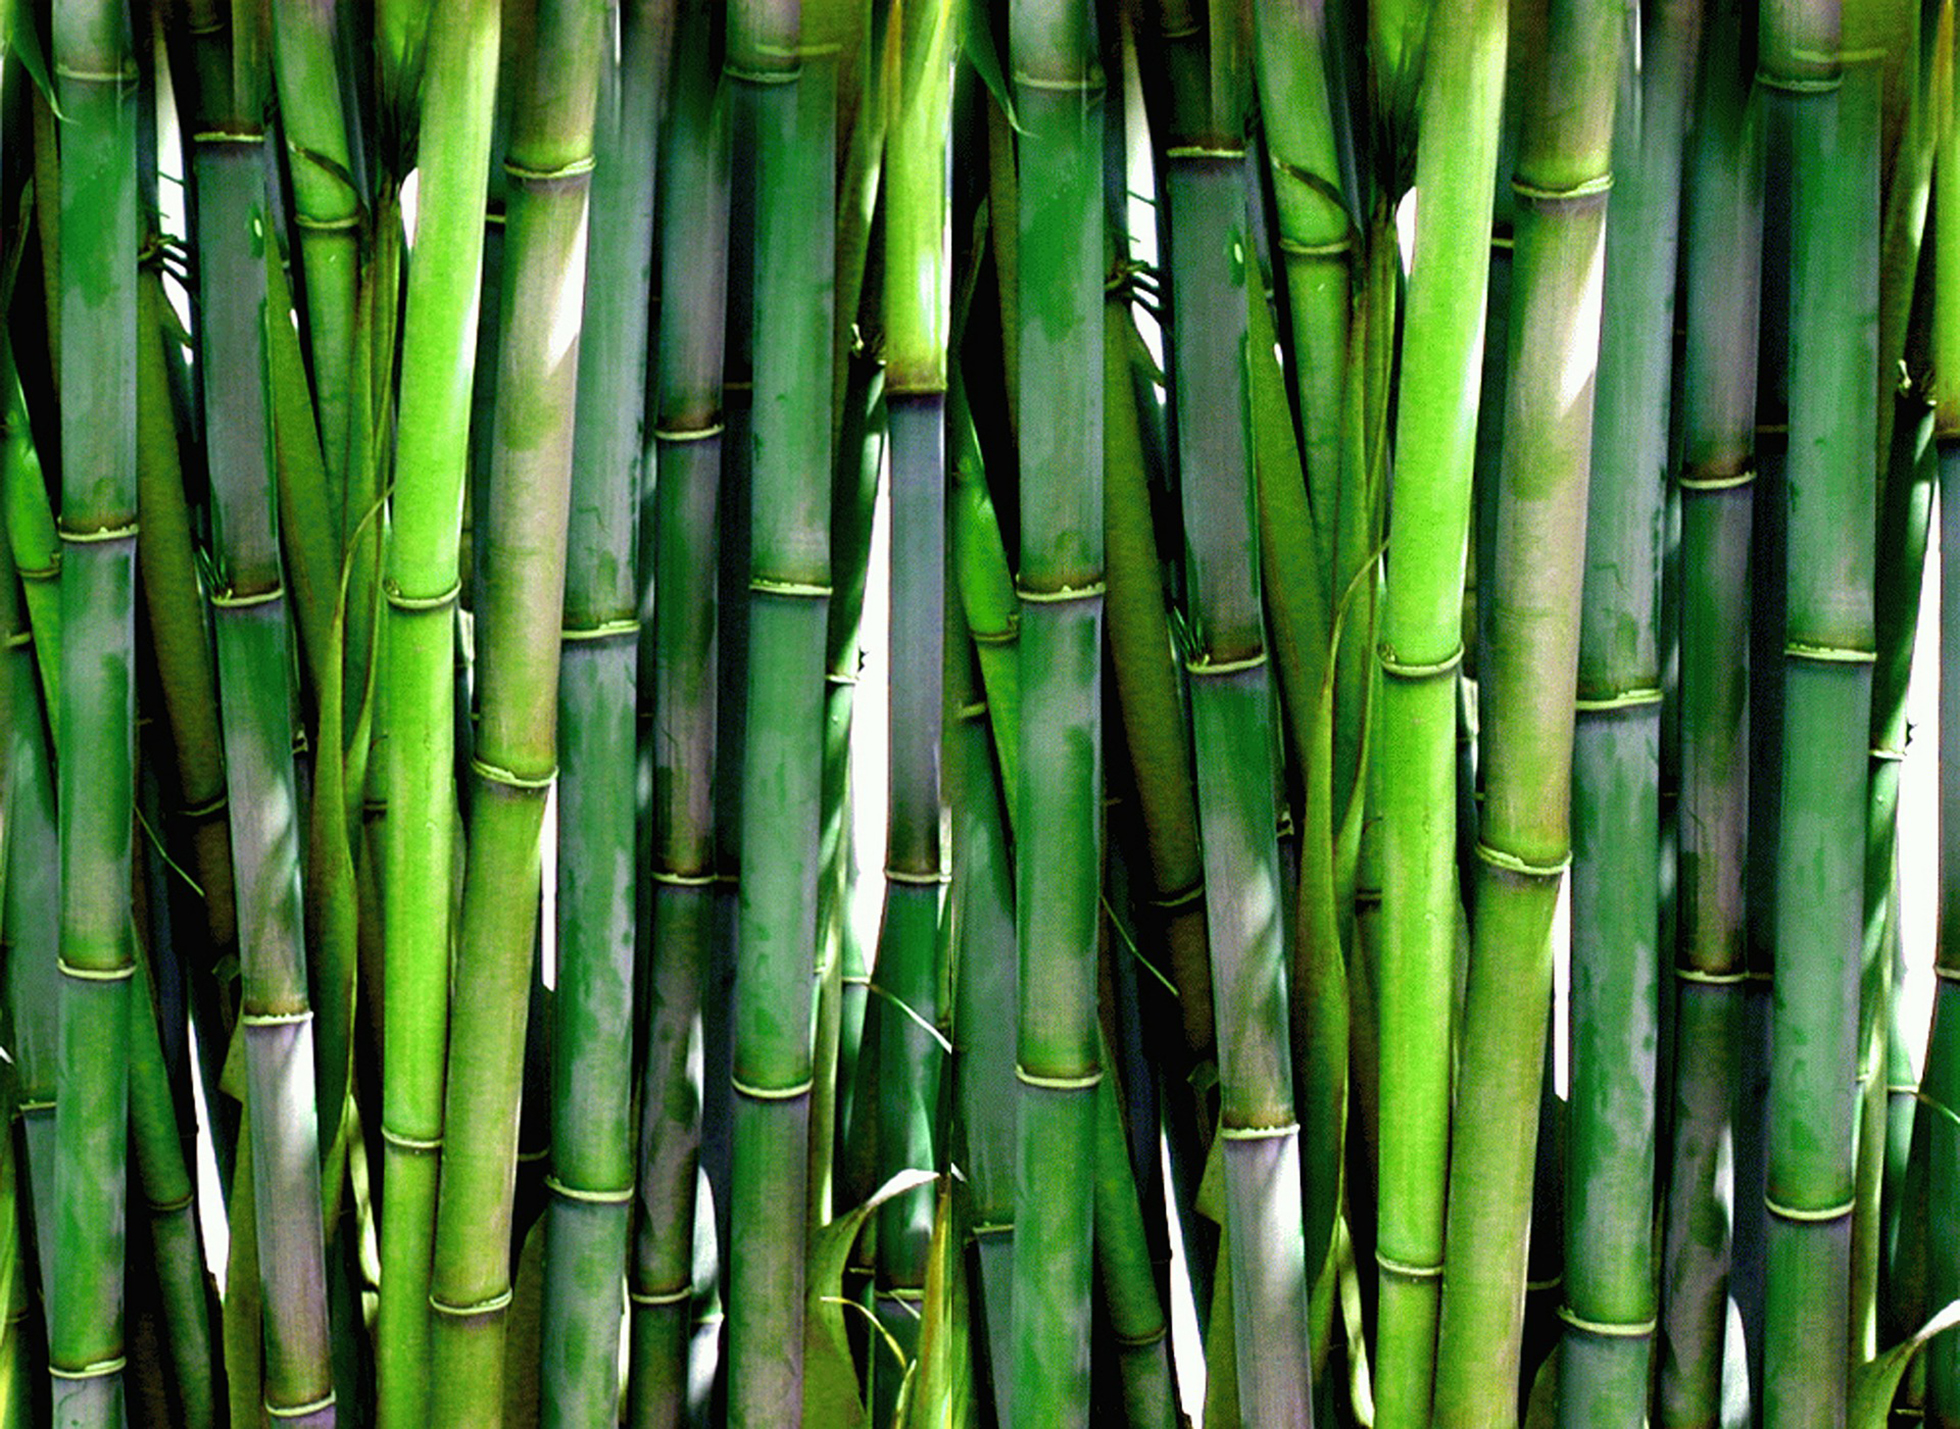 wall of green bamboo stems